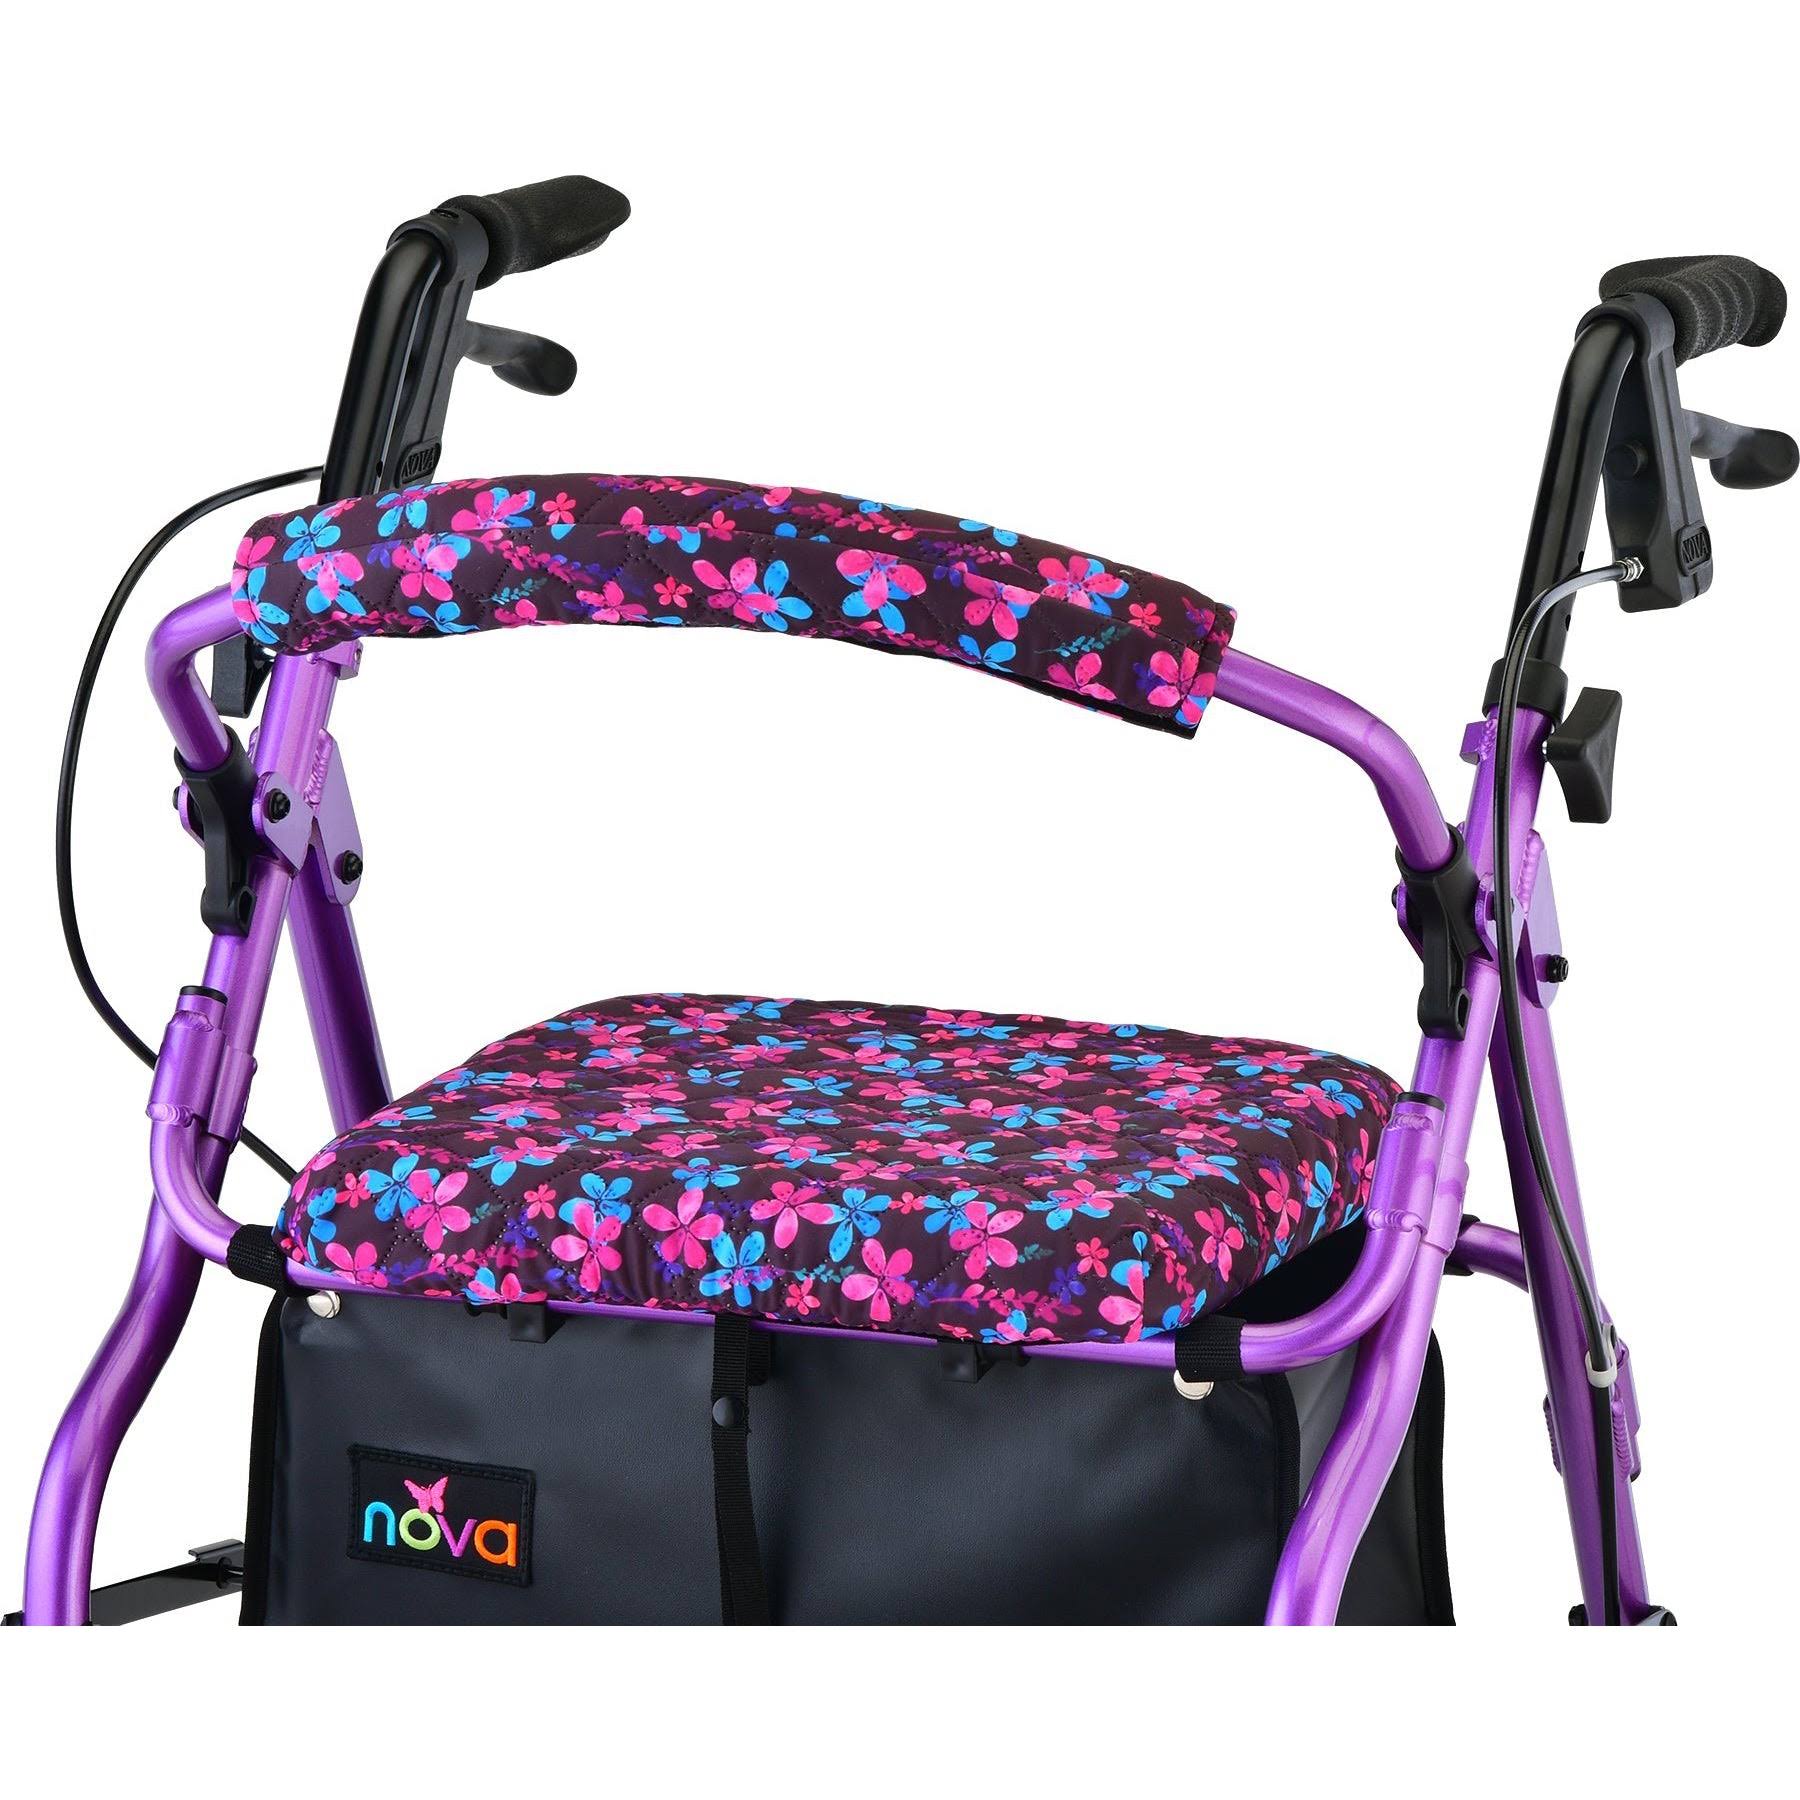 Nova Medical Products Rollator Walker Seat & Back Cover, Removable & Washable, Garden Flowers